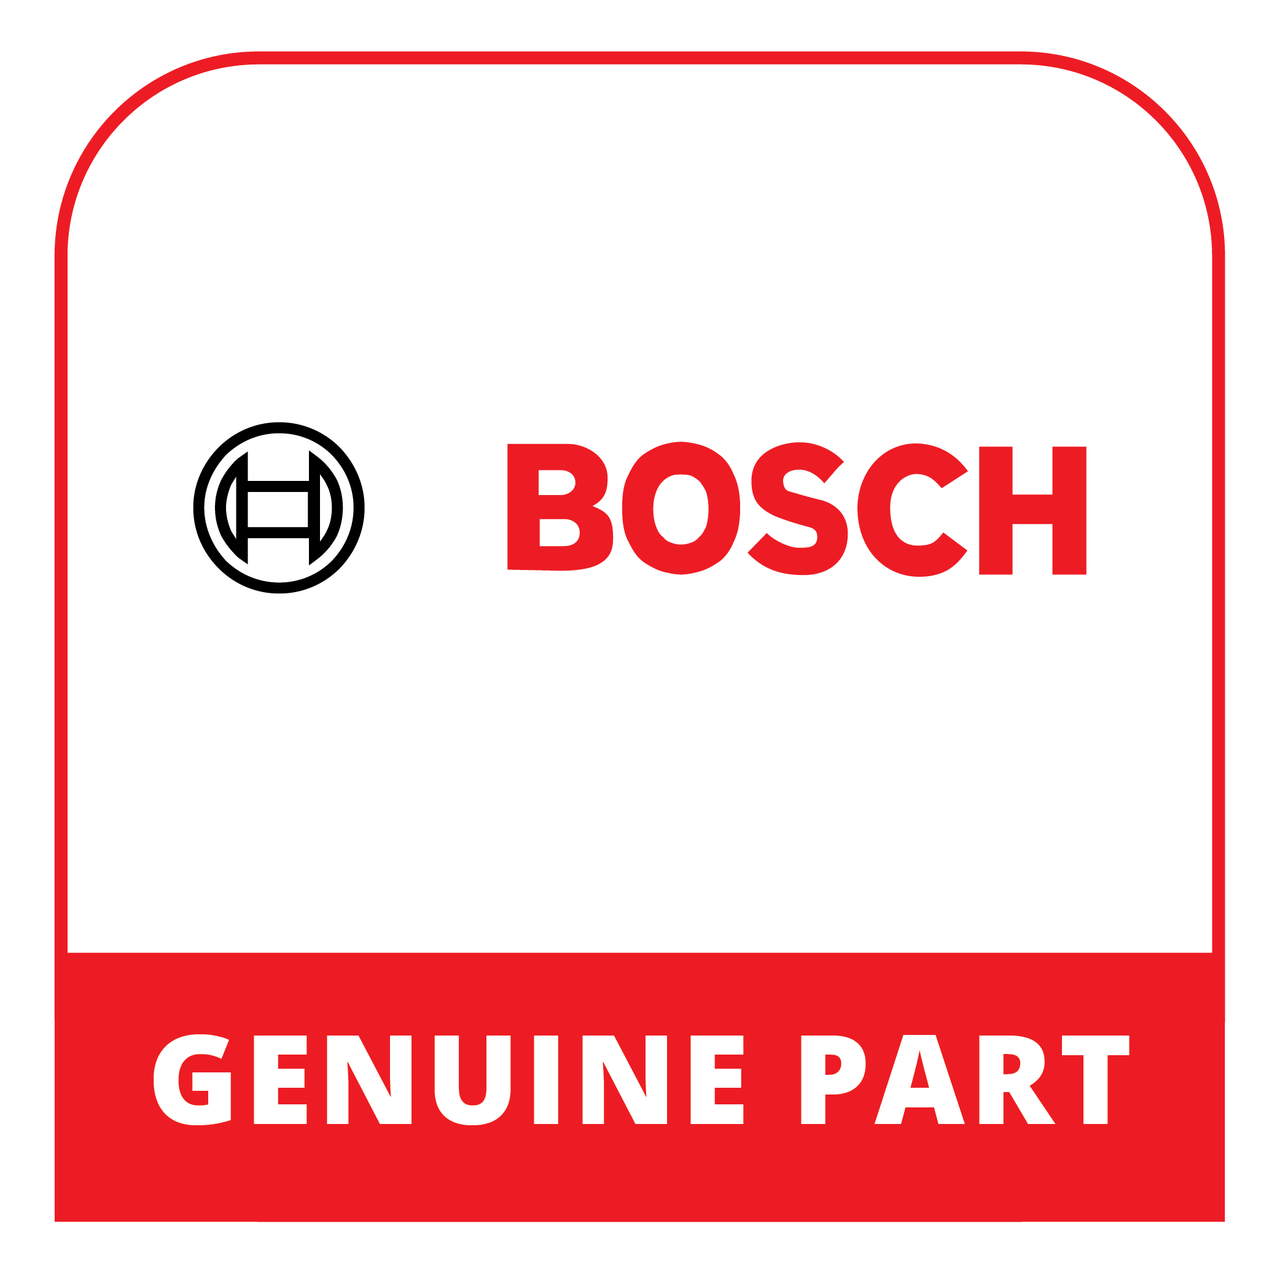 Bosch (Thermador) 20001937 - Drawer - Genuine Bosch (Thermador) Part